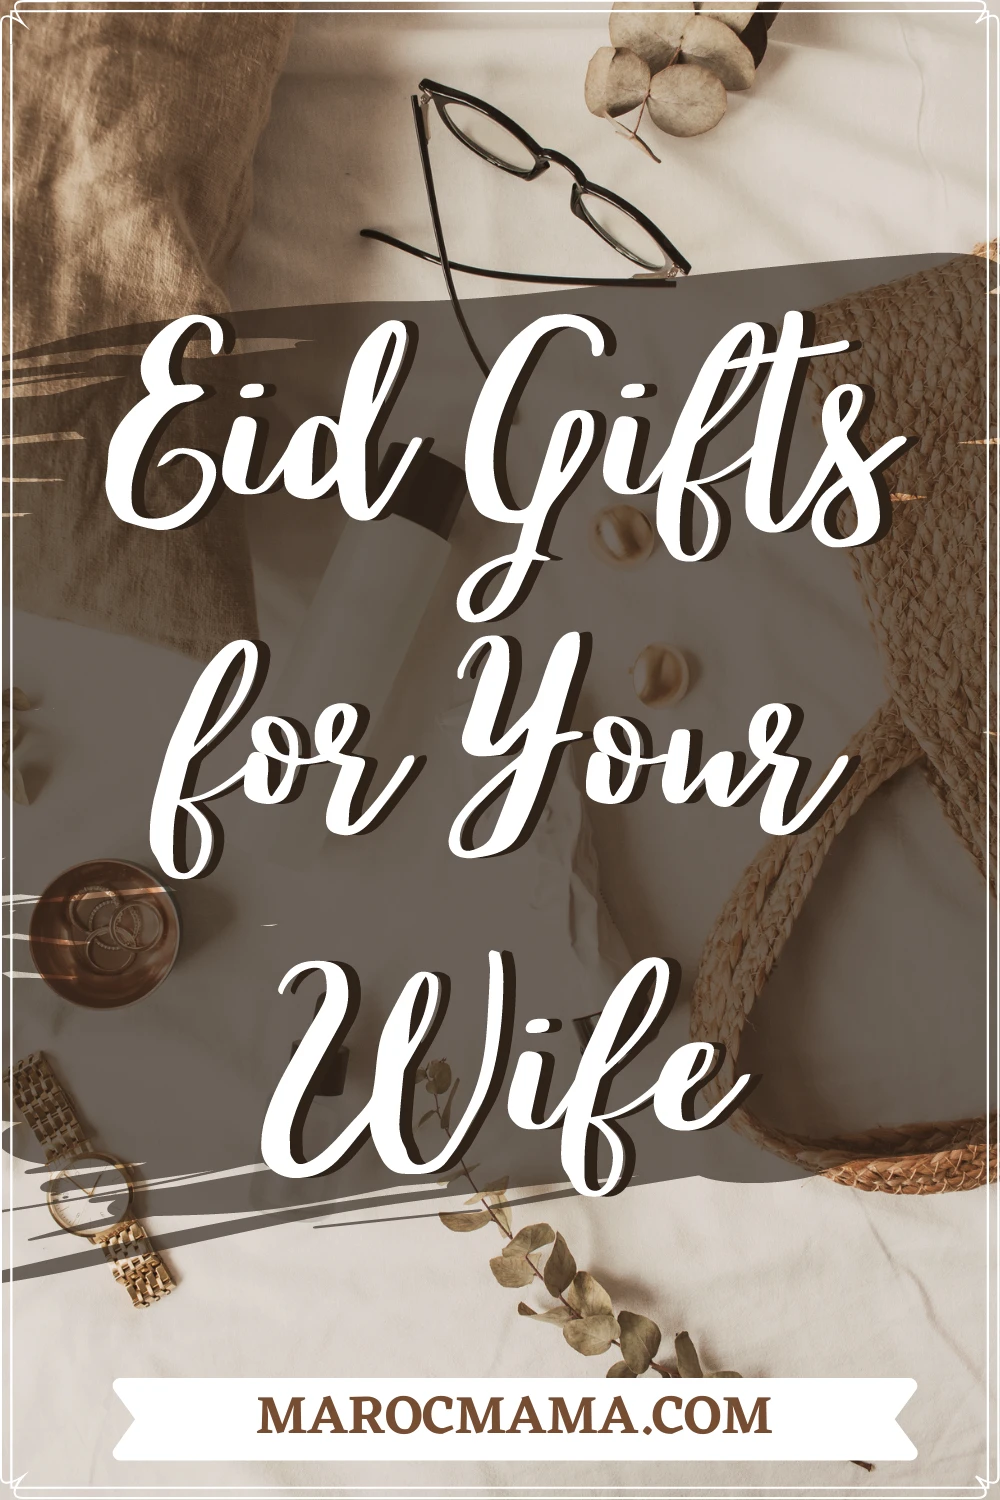 Details 170+ eid gifts for her latest